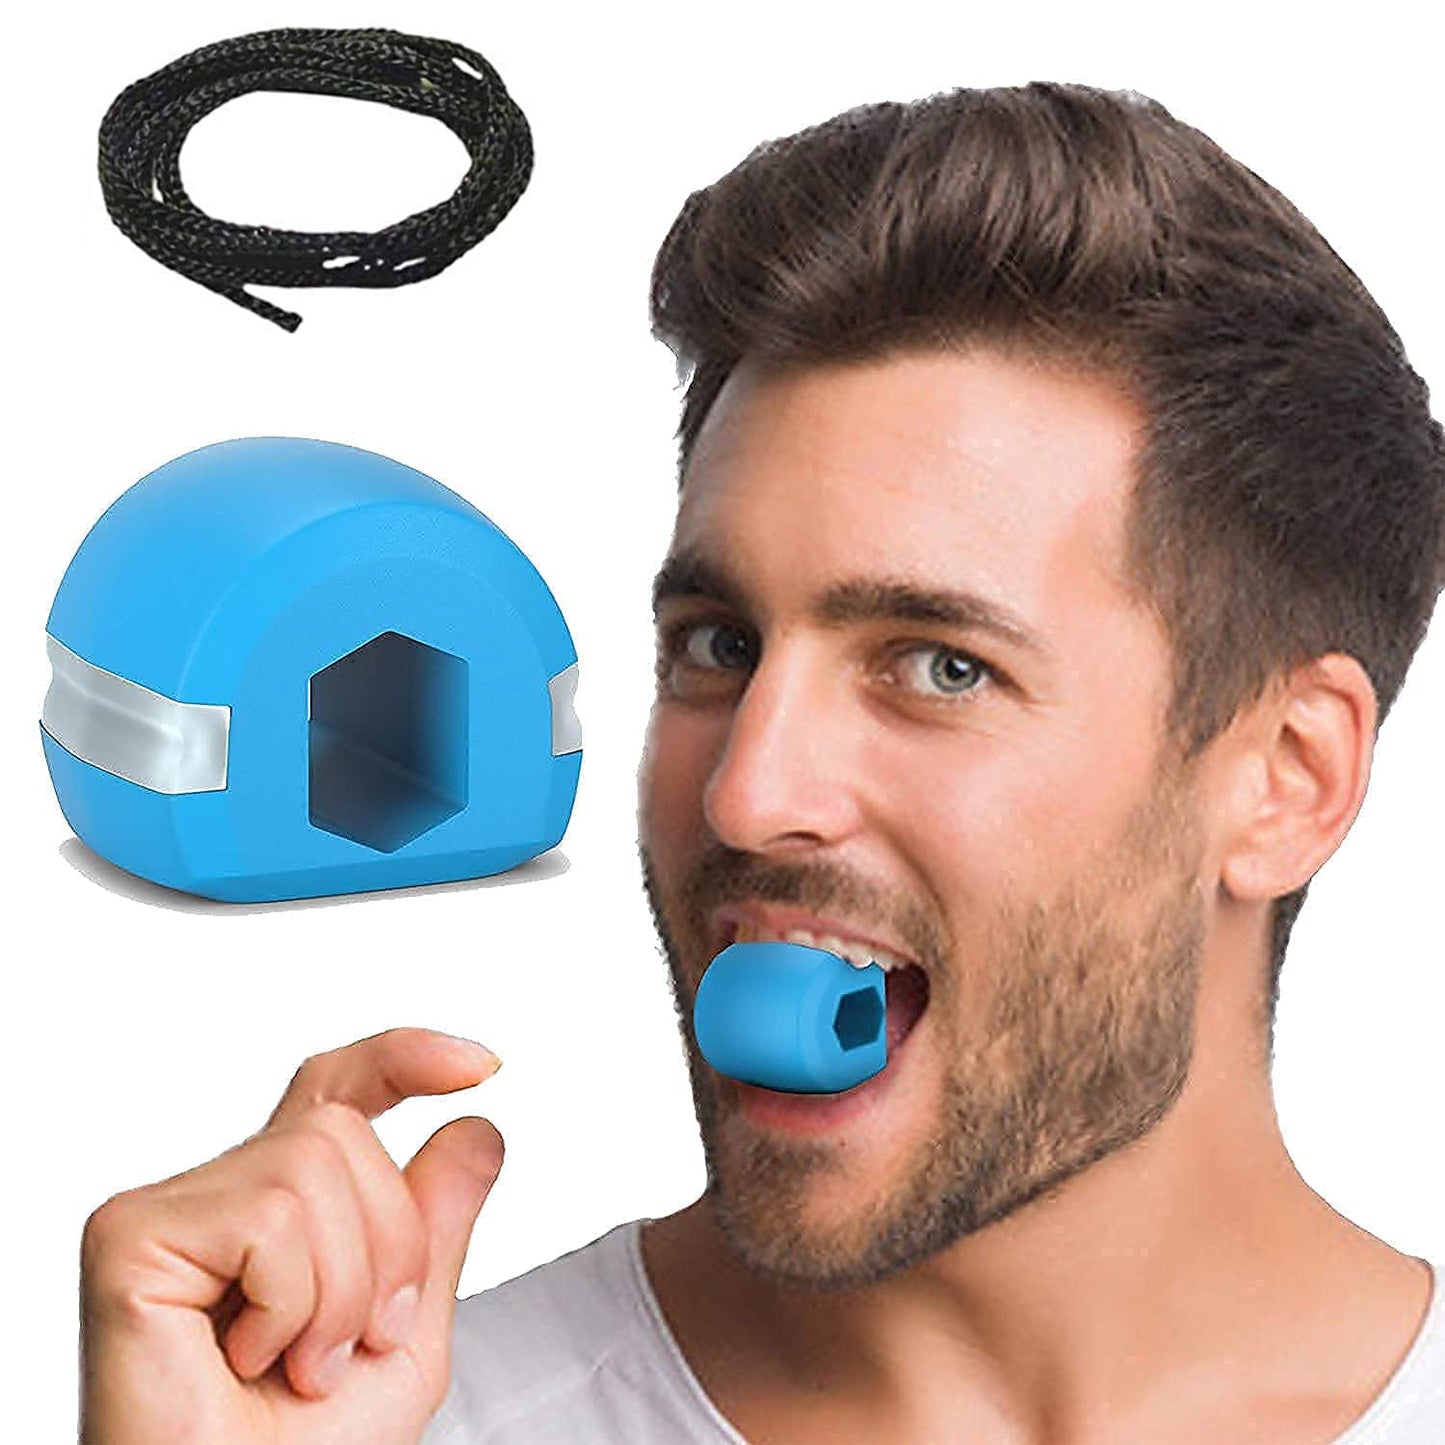 6101 V Cn Blue Jaw Exerciser Used To Gain Sharp And Chiselled Jawline Easily And Fast. 